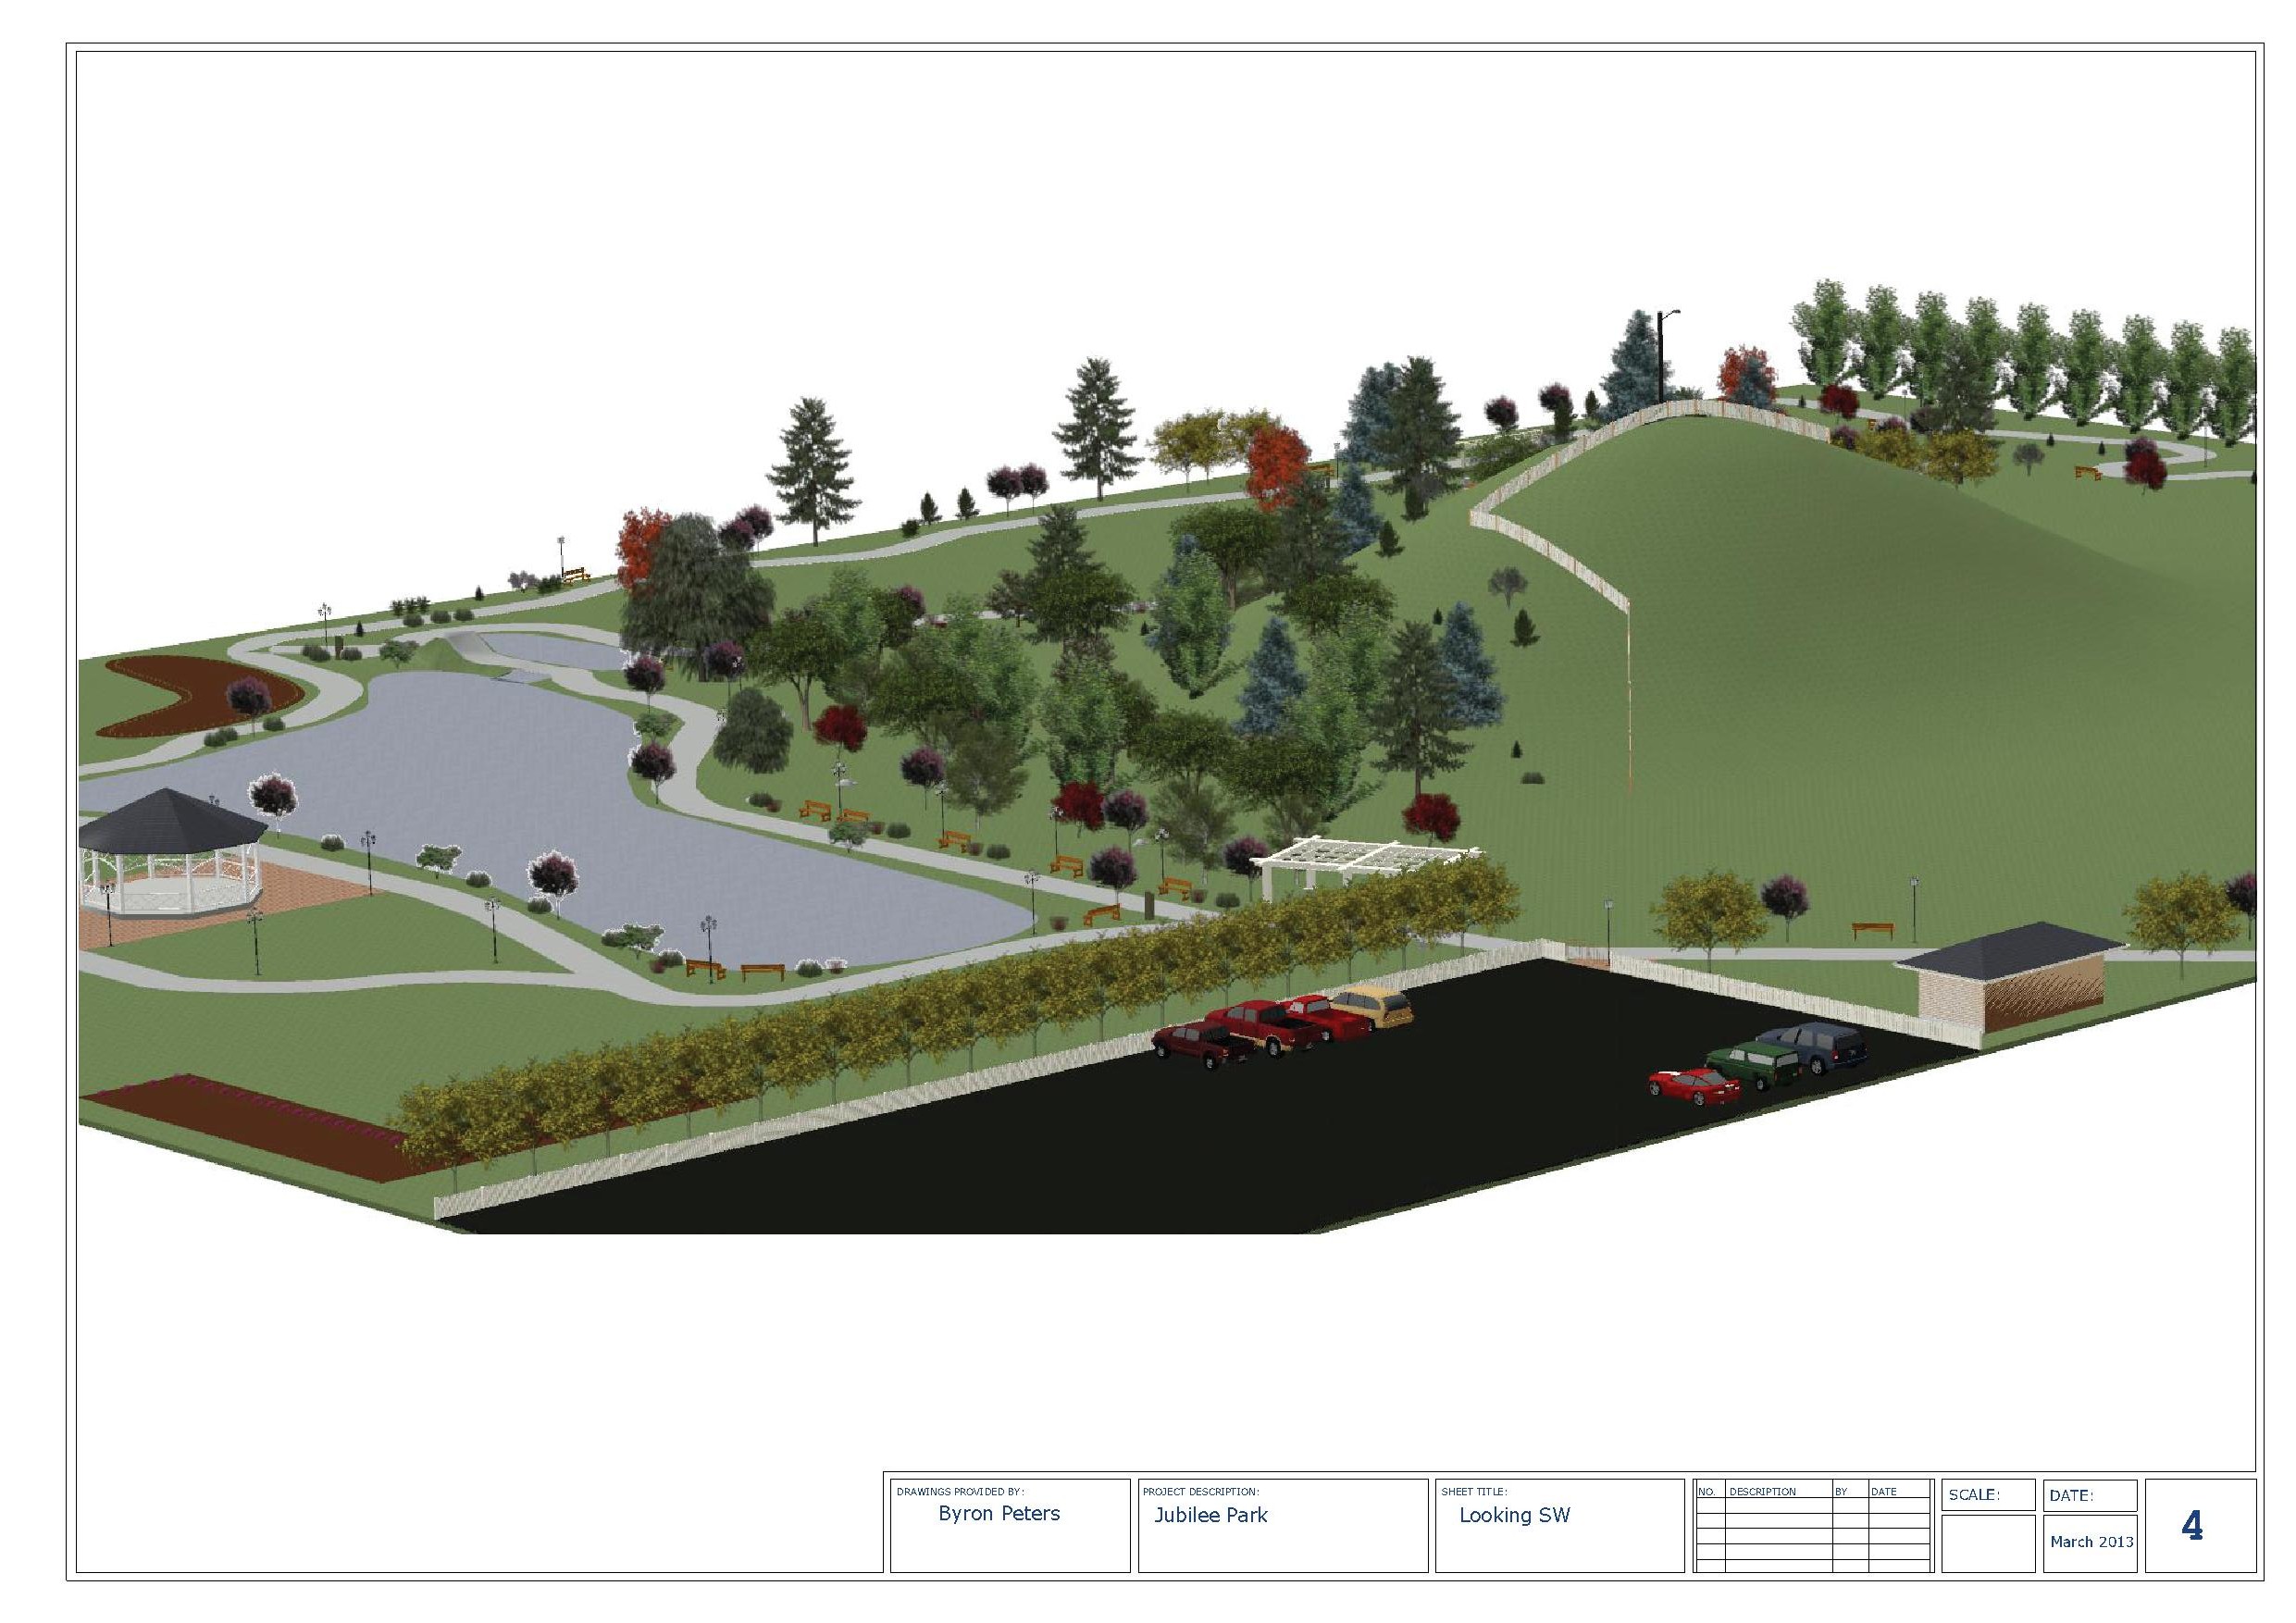 Jubilee Park Proposed Layout Image 2